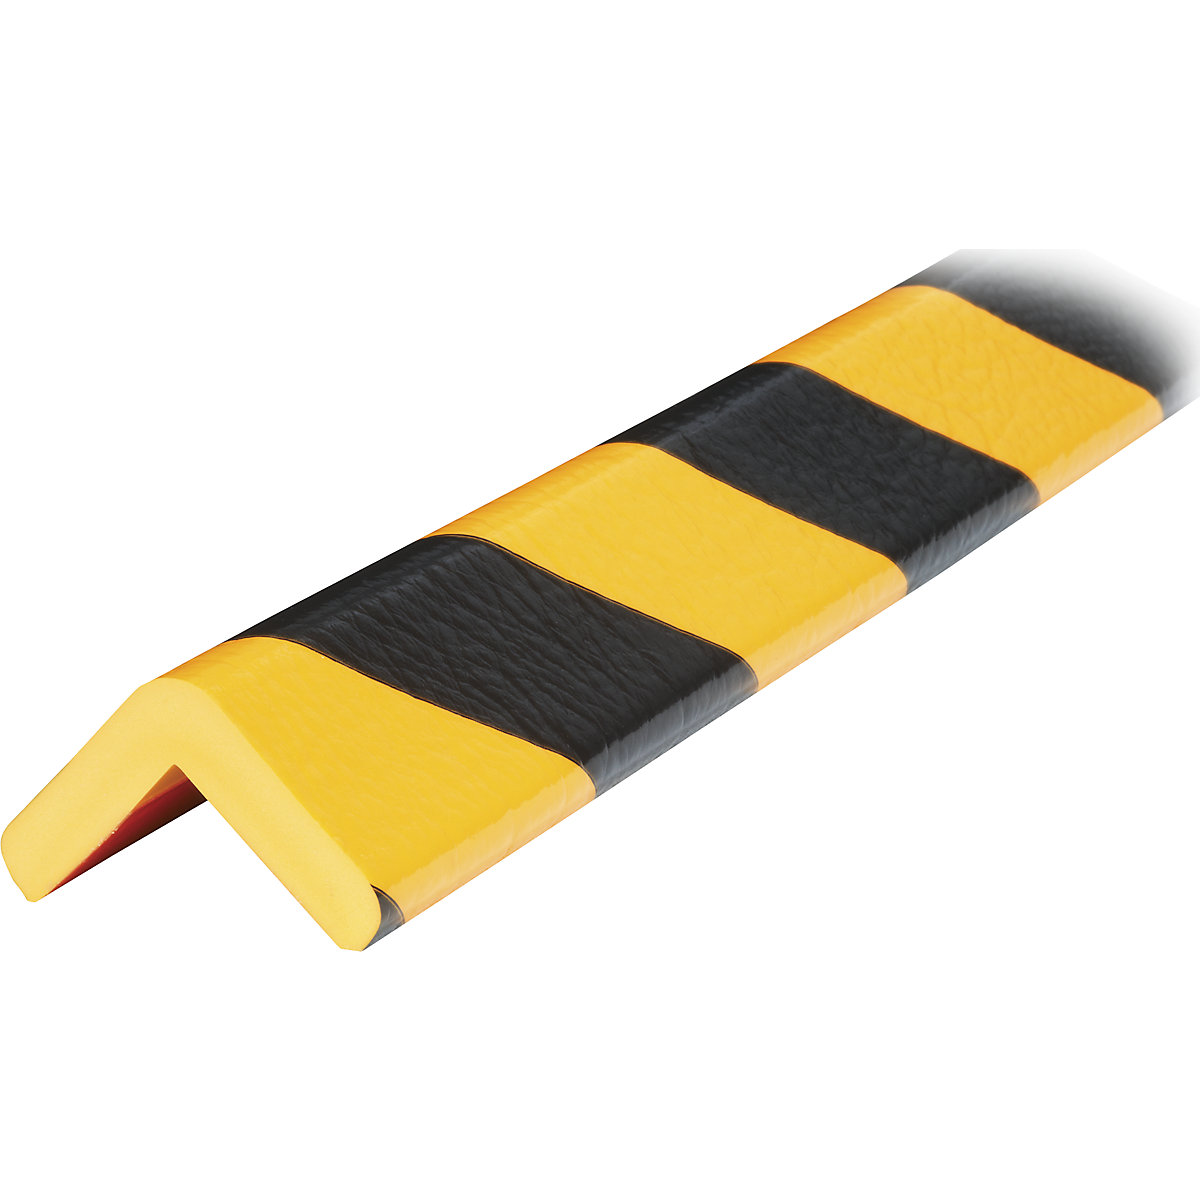 Knuffi® corner protection – SHG, type E, cut to size, sold by the metre, black / yellow-10